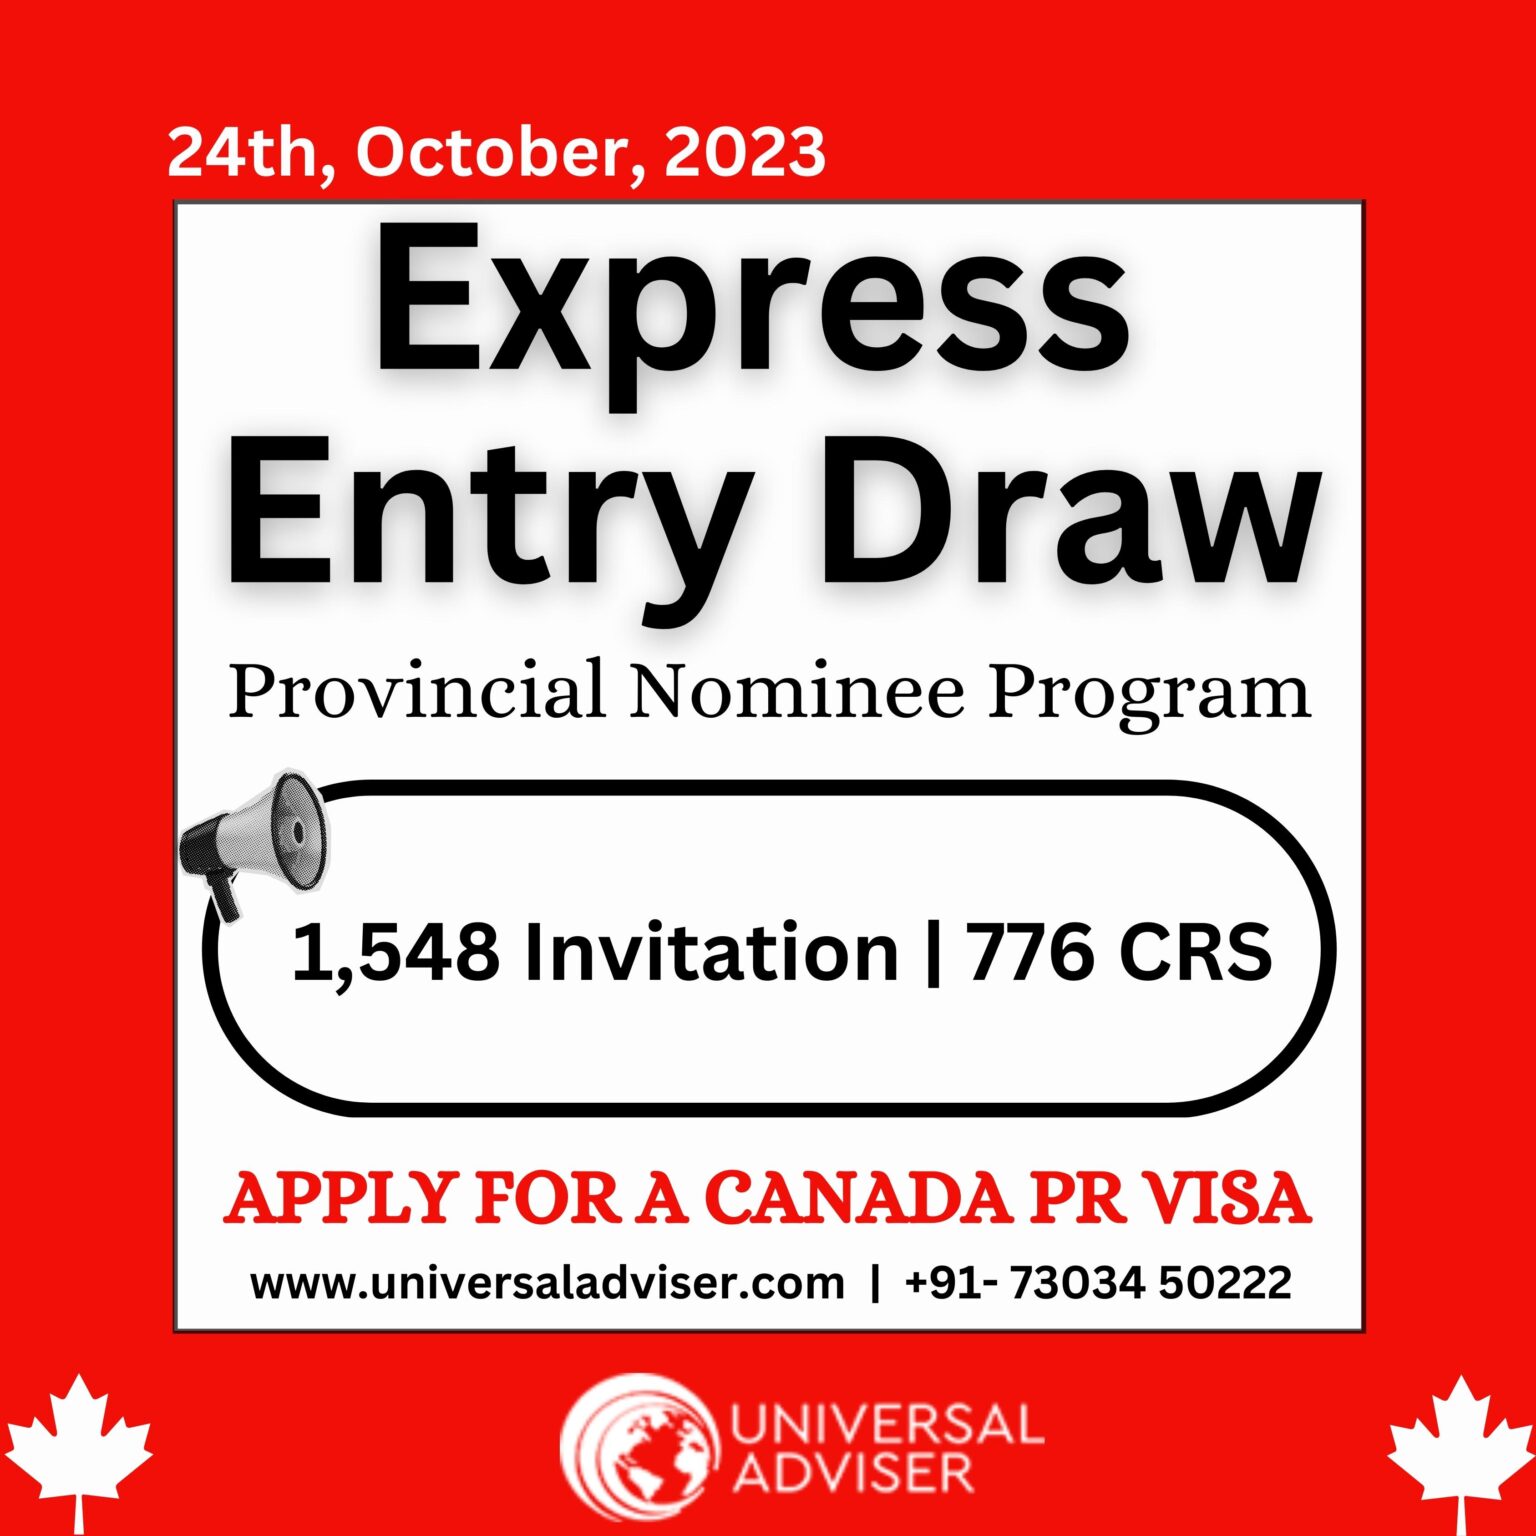 Latest Express Entry Draw Invited 932 Candidates for PR